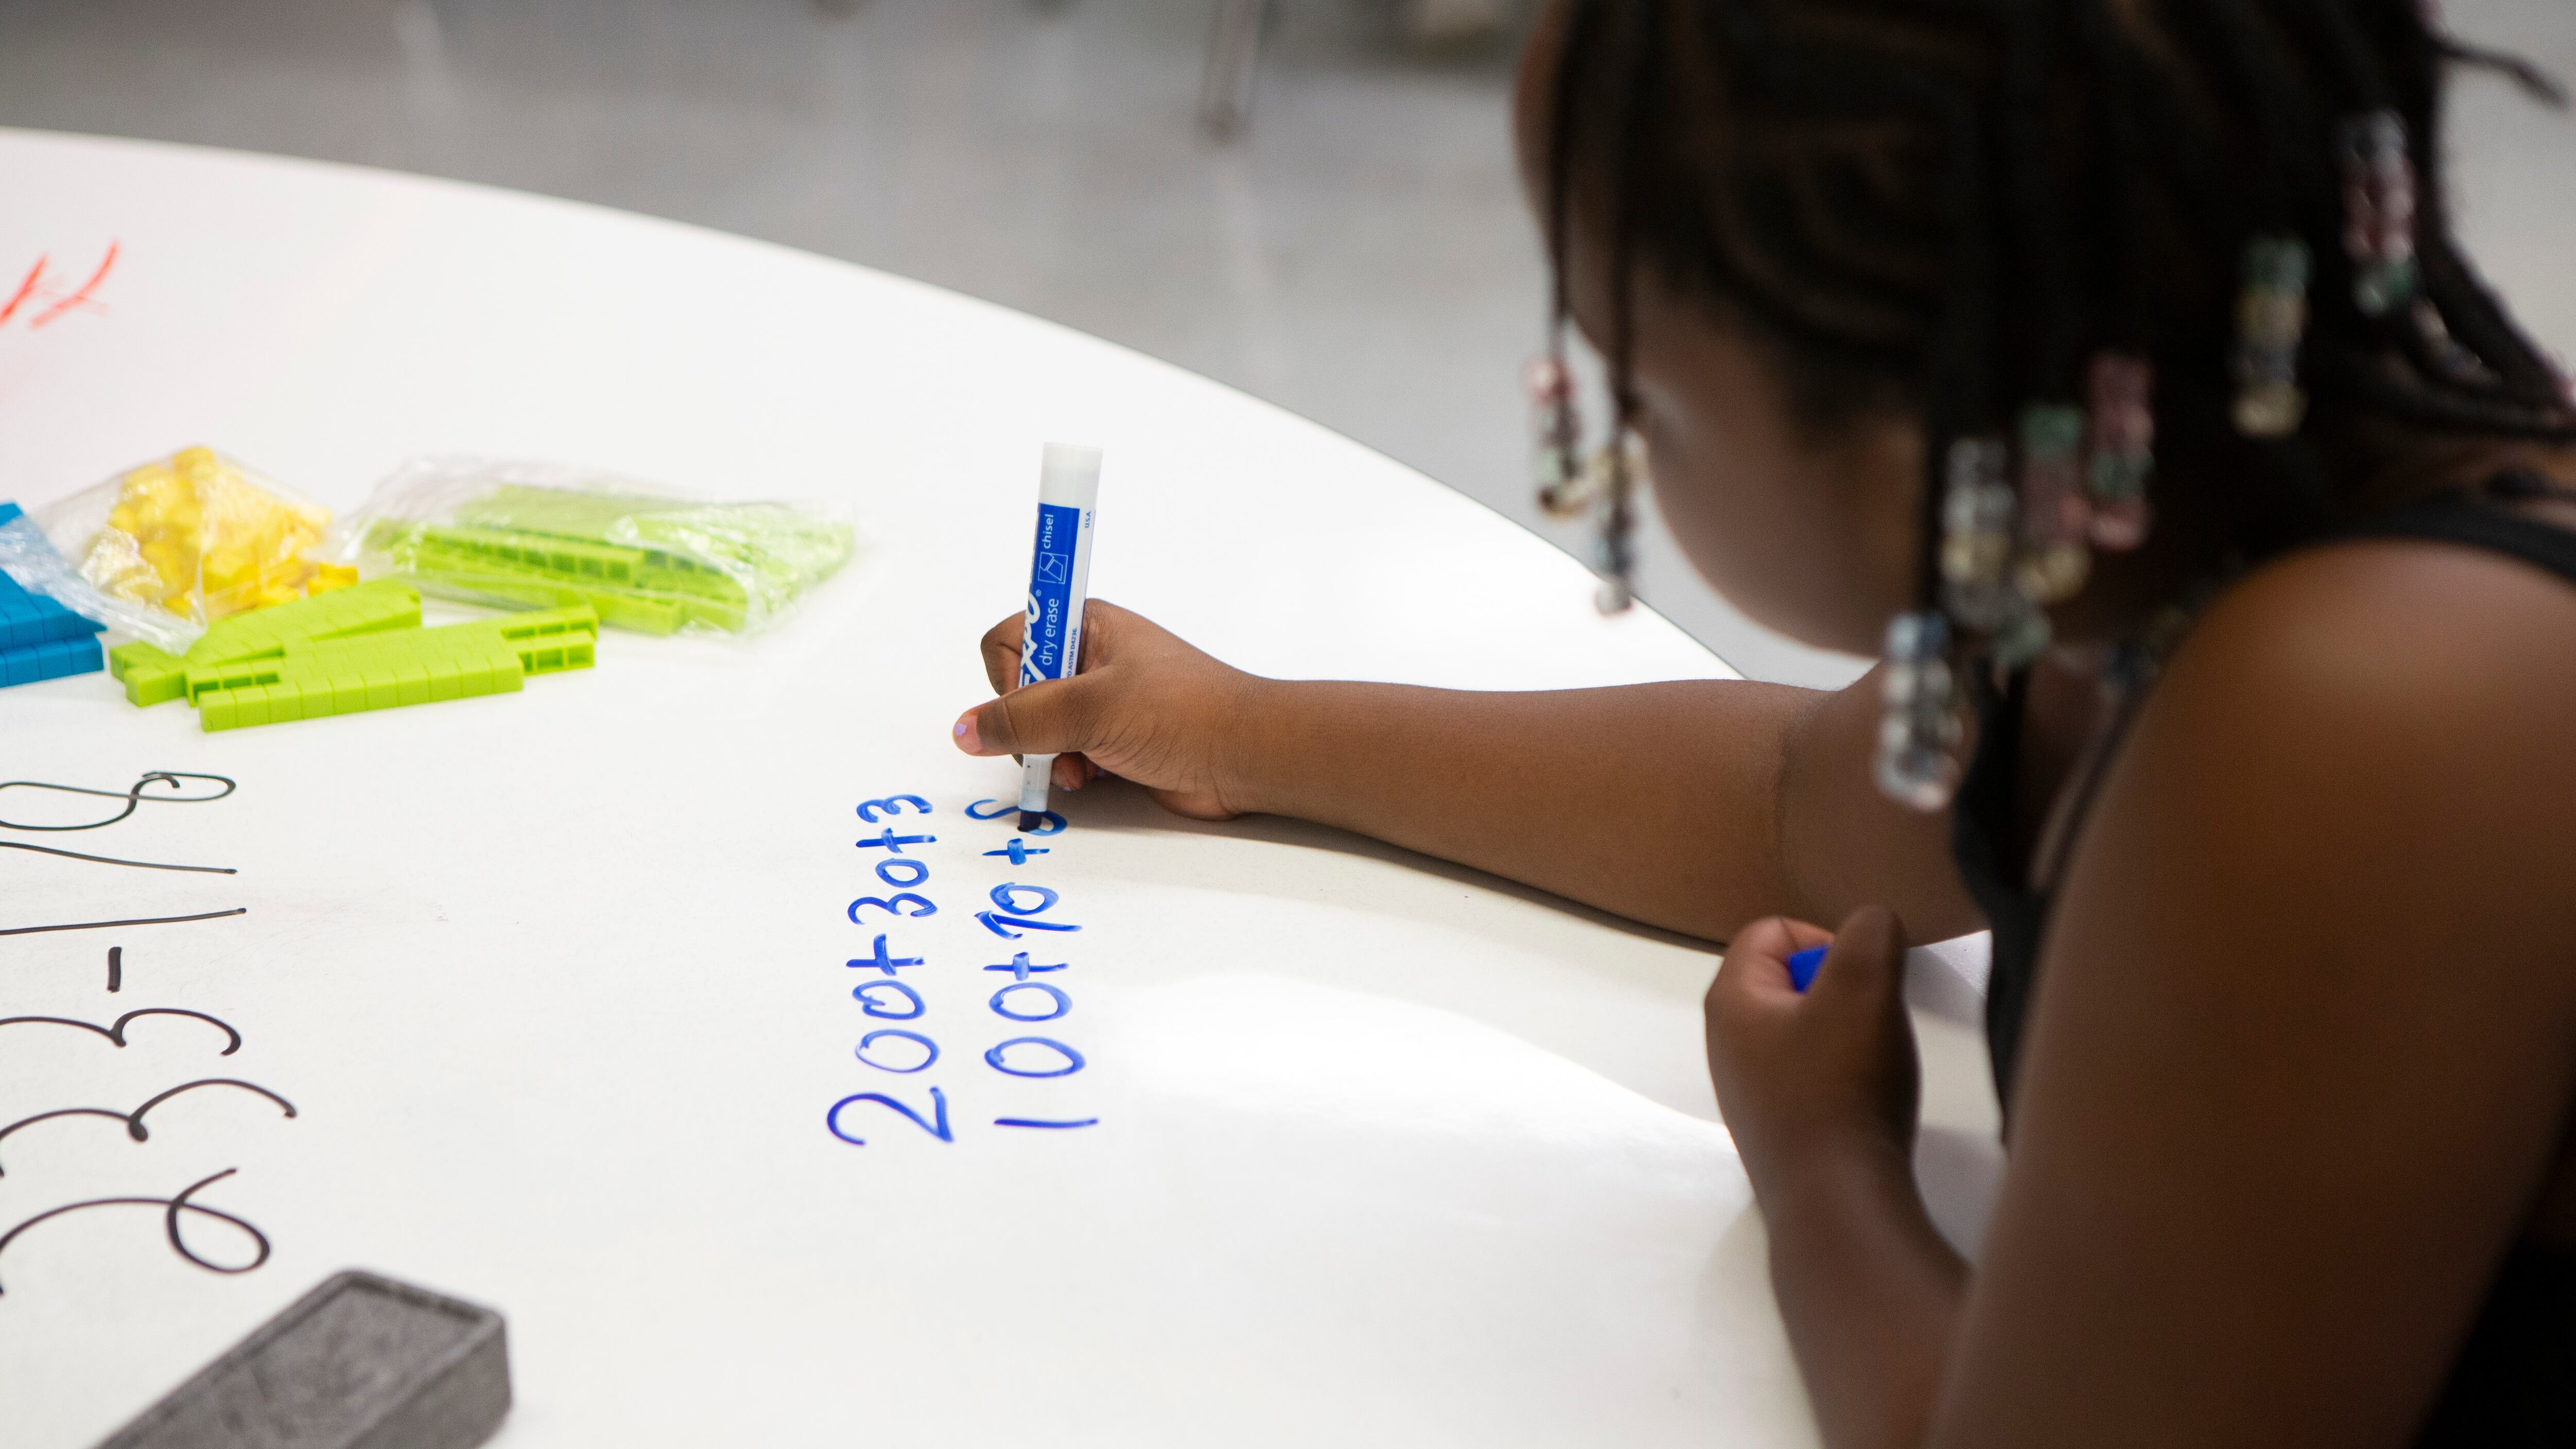 A young girl holds a blue marker in her hand as she sits at a desk and writes an equation on poster paper.